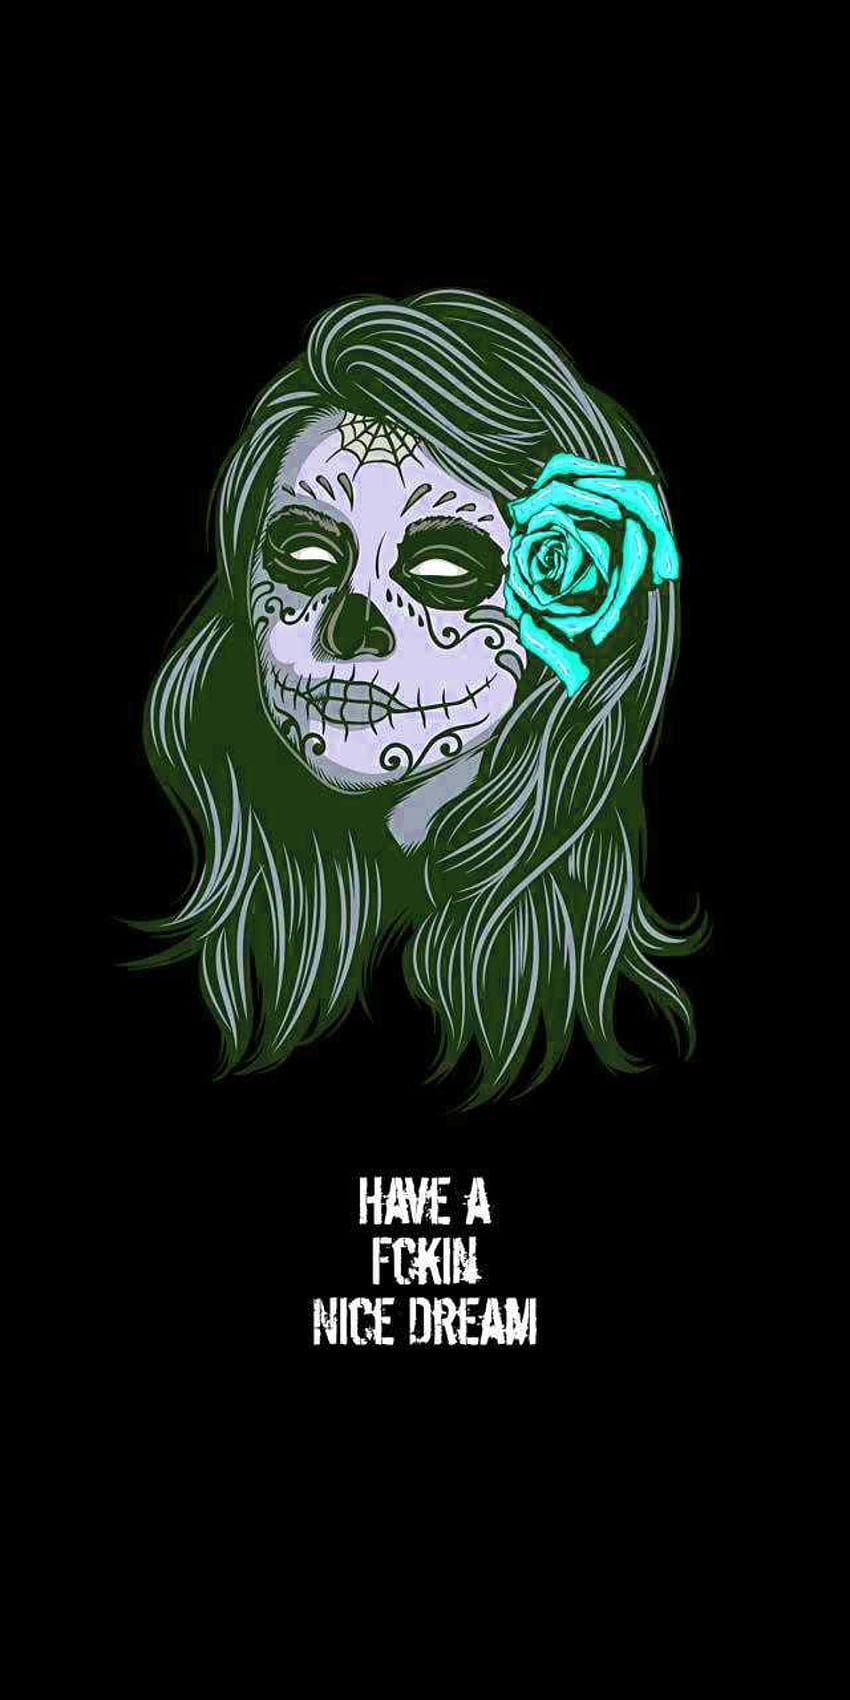 Have a nice dream by day of the dead - Mexico